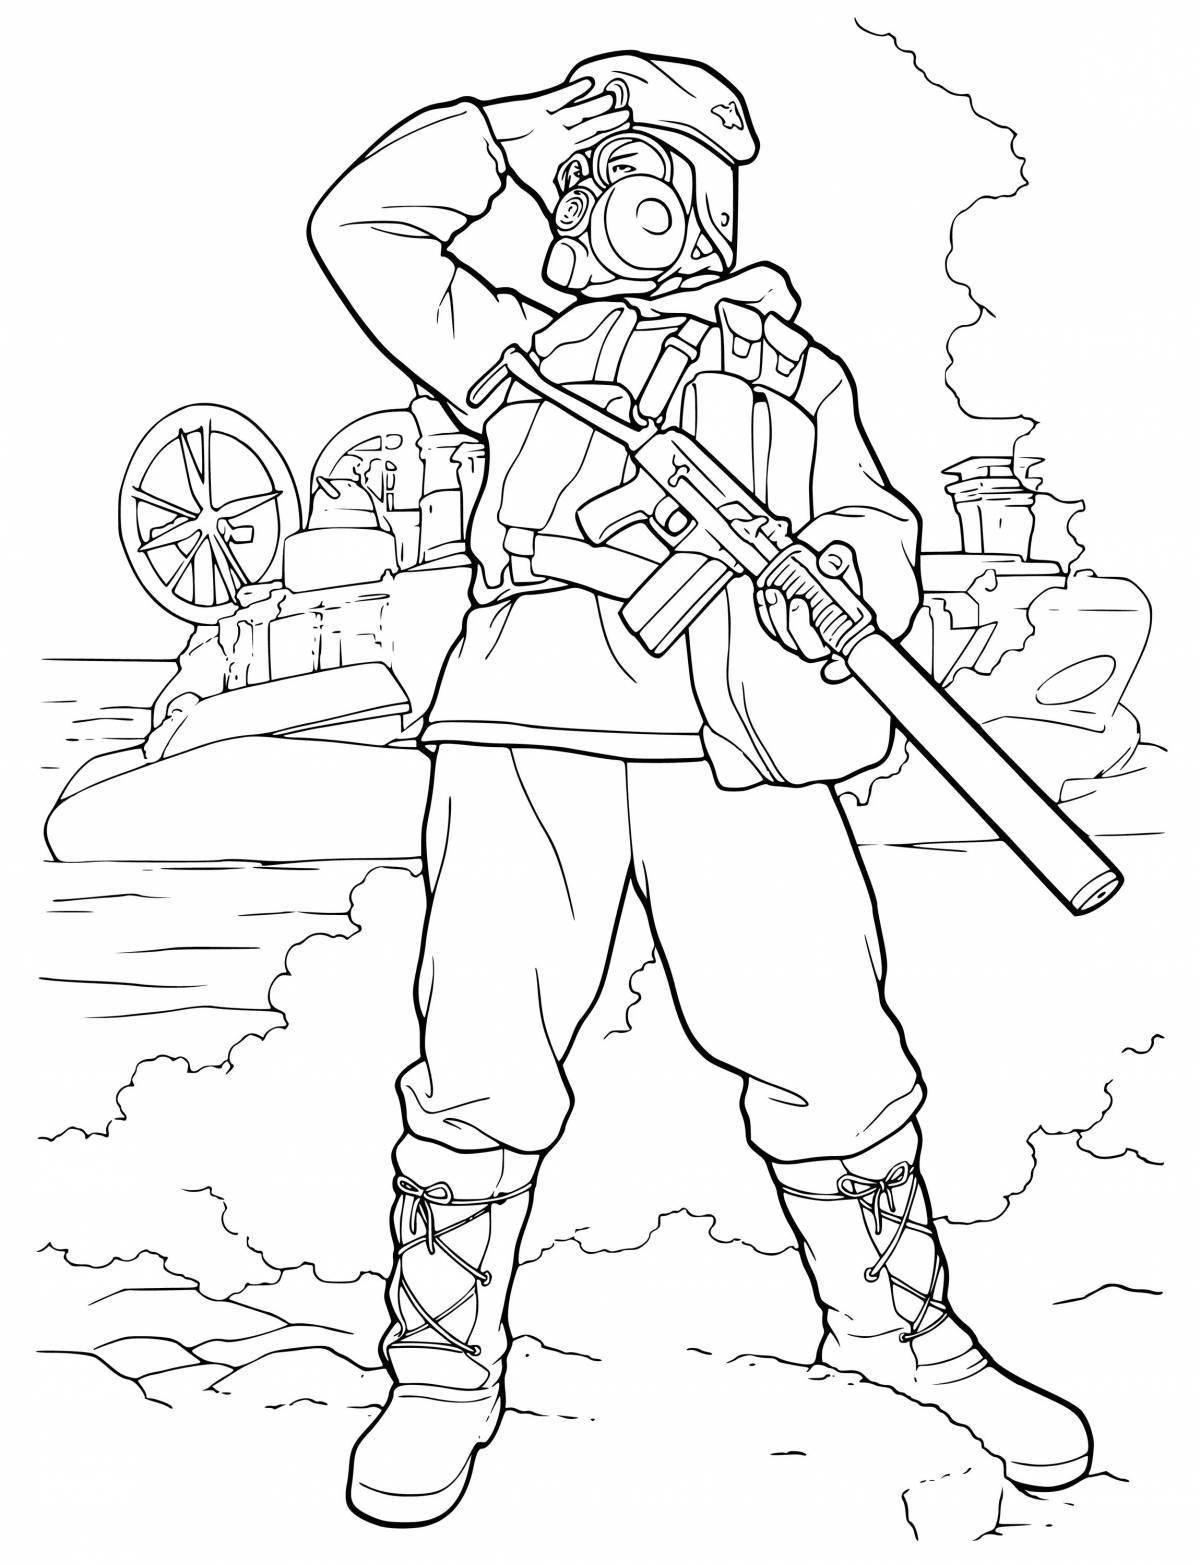 Compact soldier coloring page